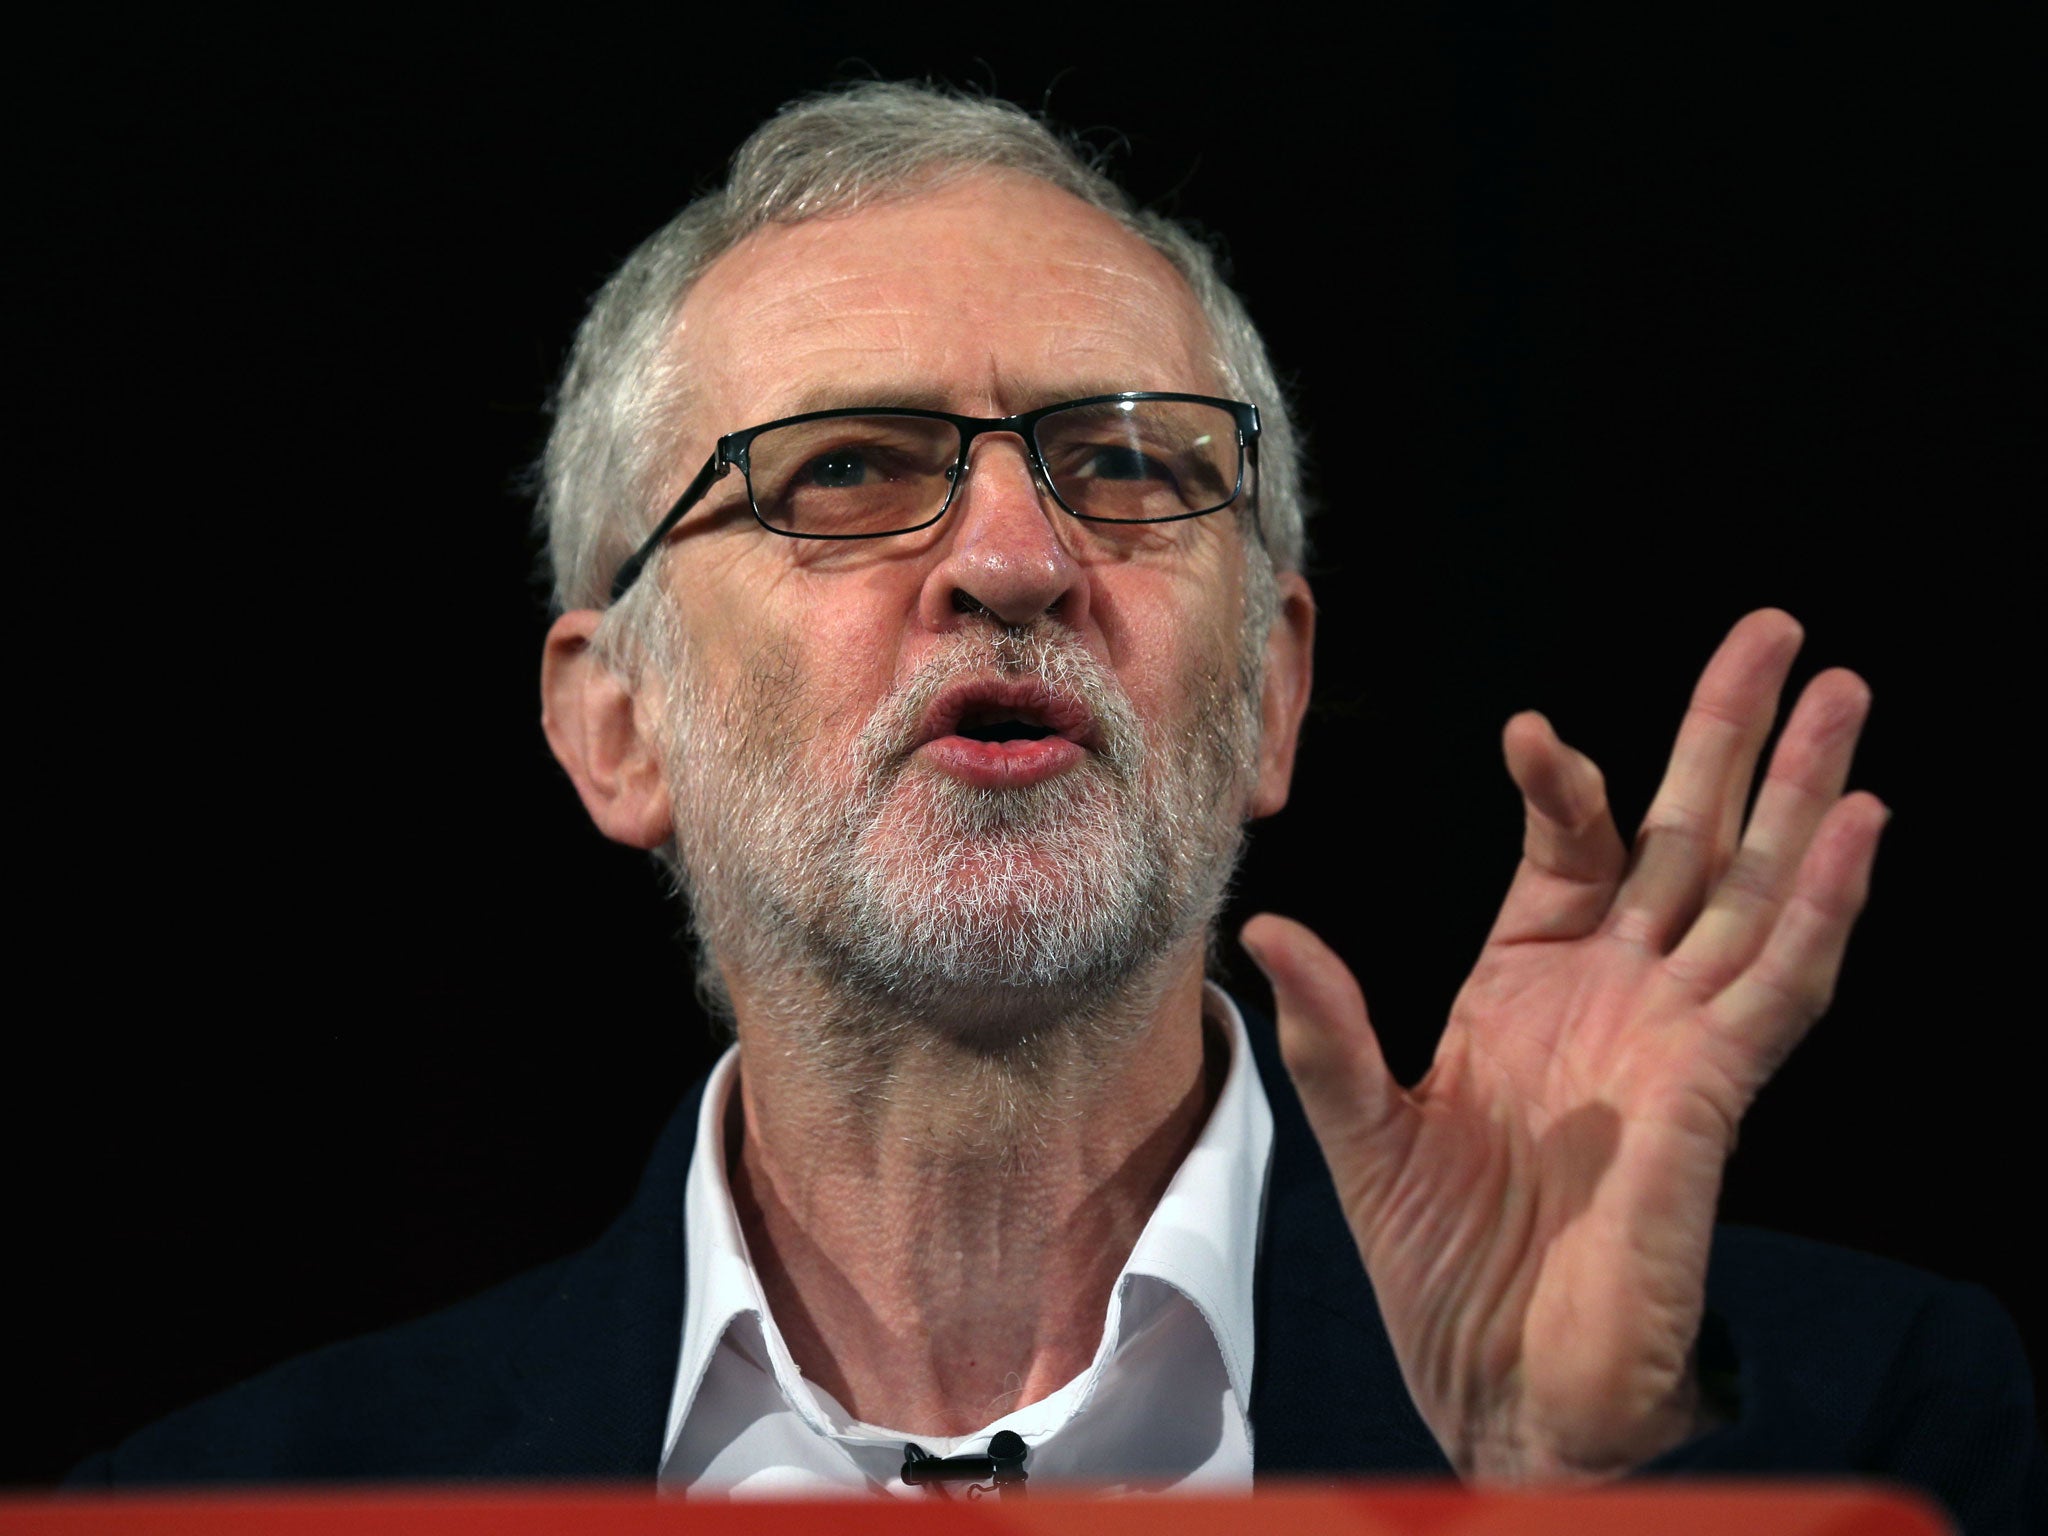 Labour’s turmoil has become linked to Corbyn’s survival prospects as leader